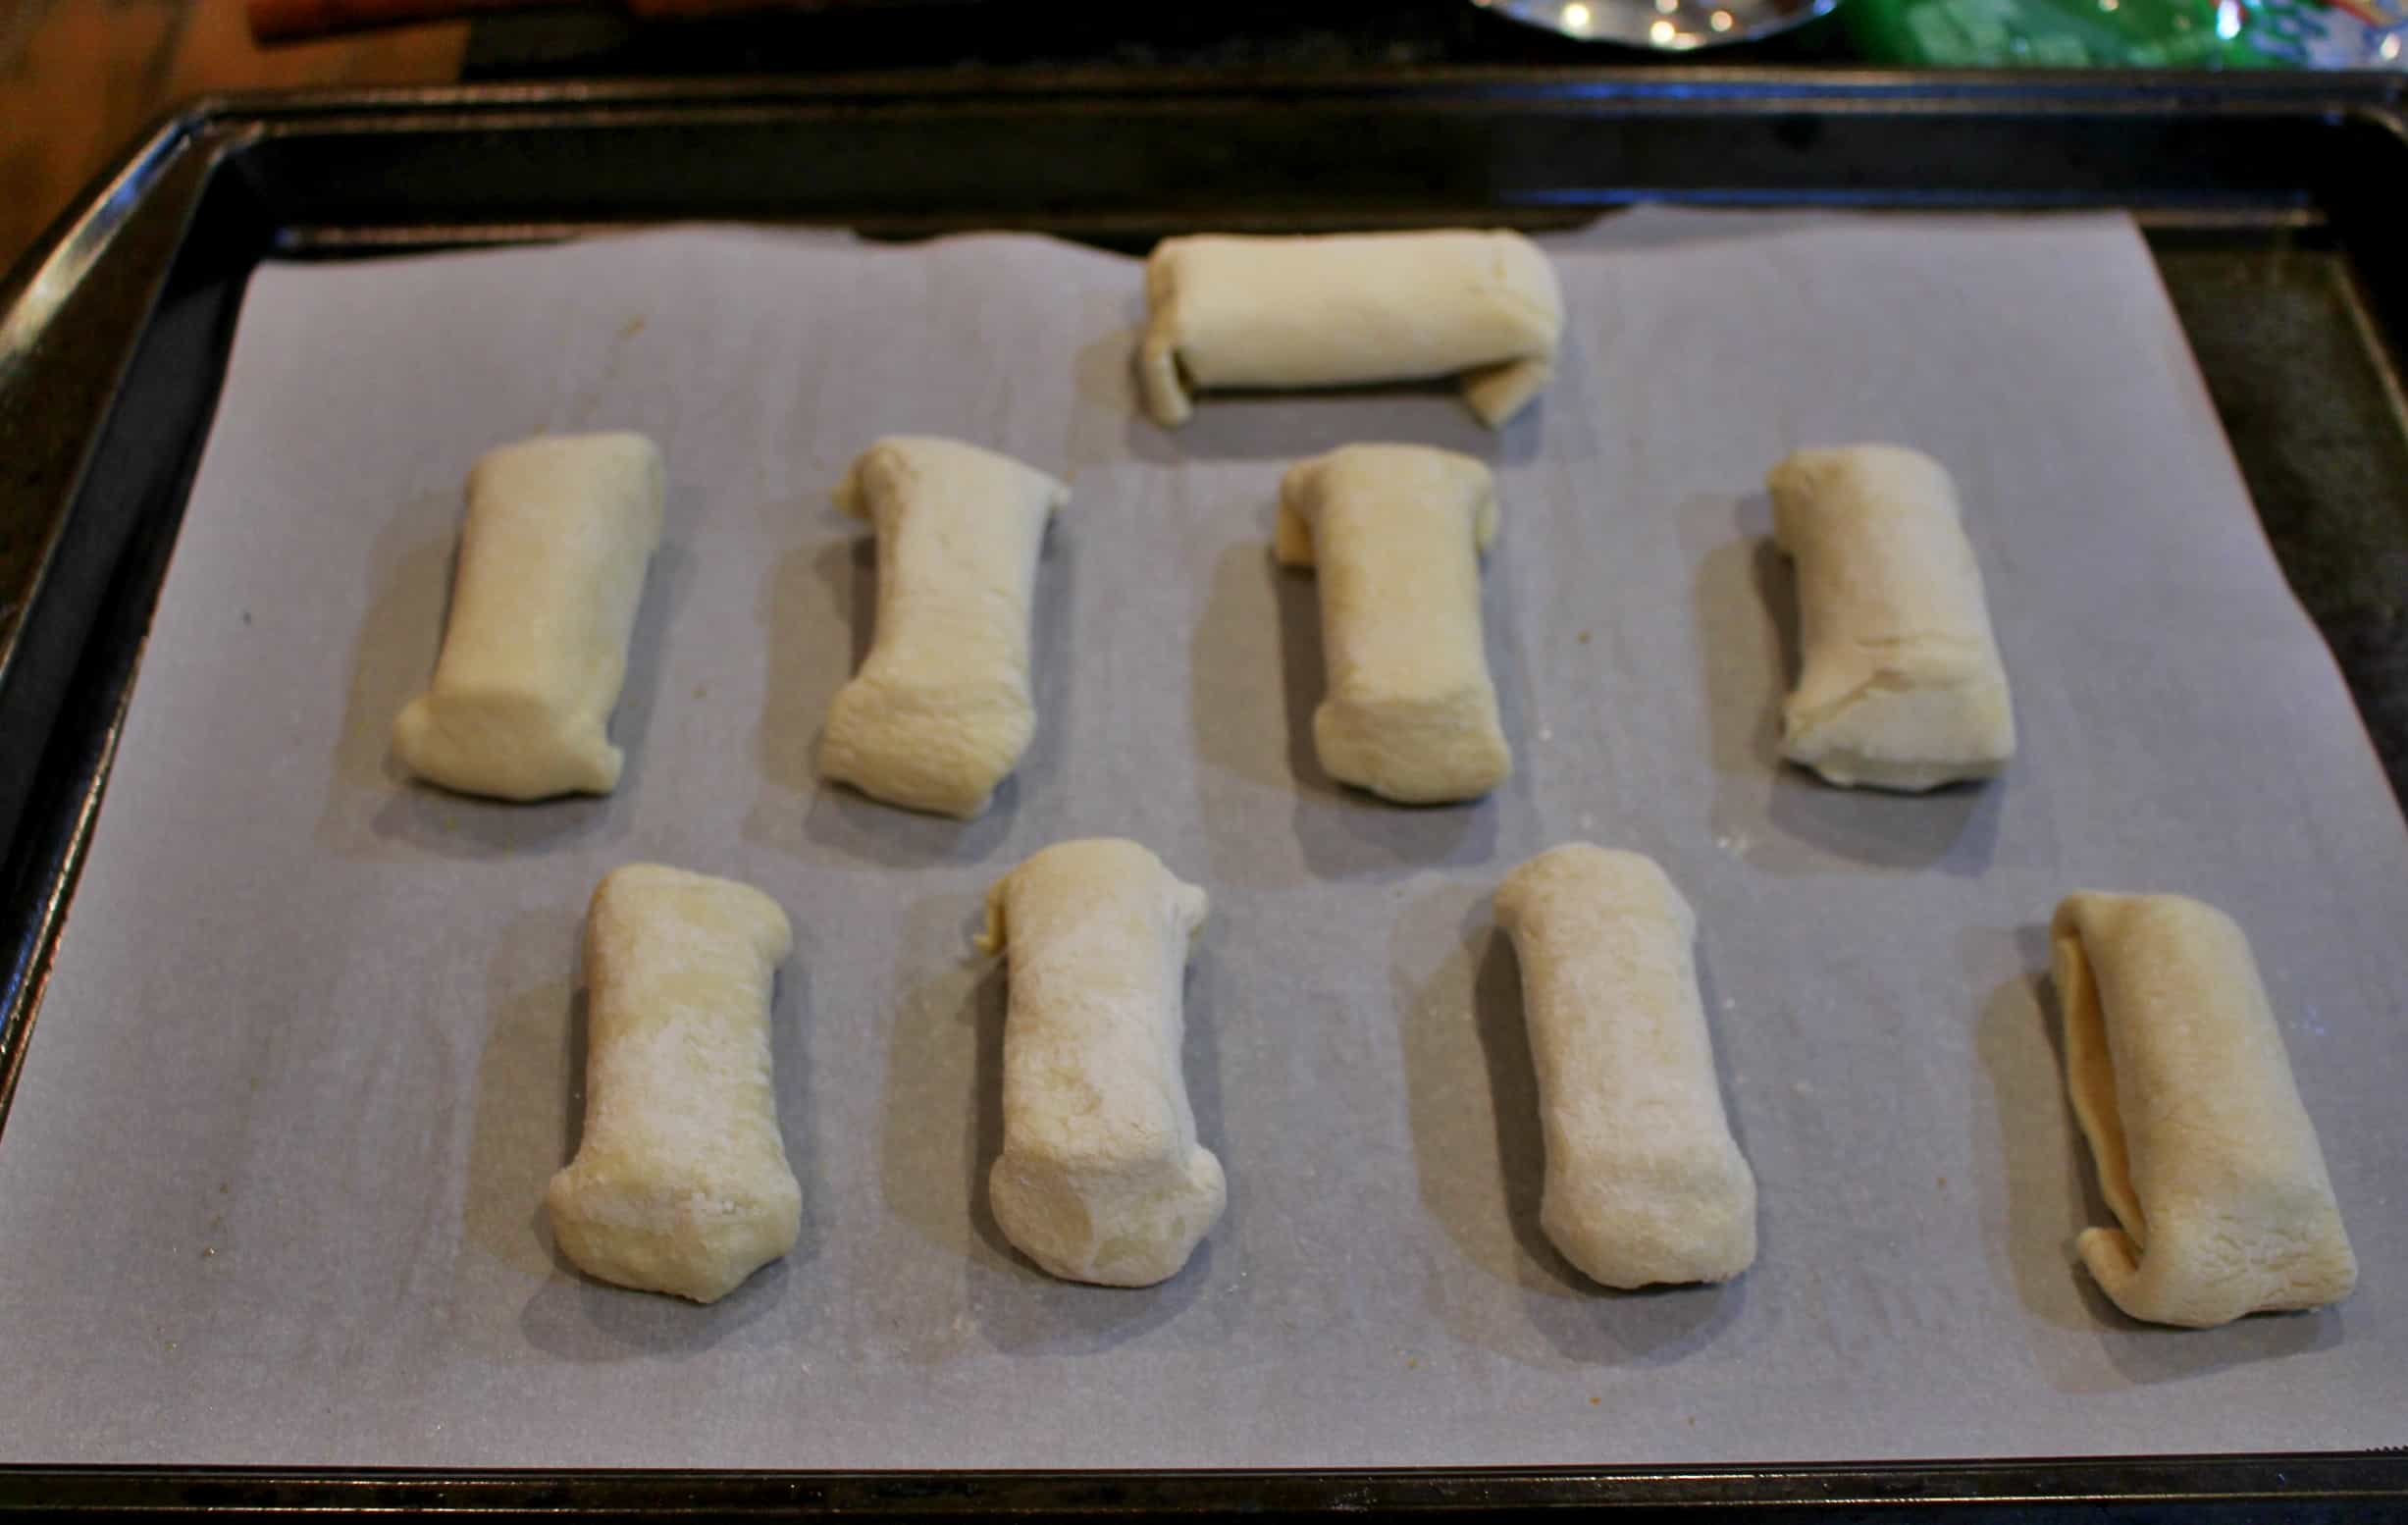 Prepared Puff Pastry for Bake